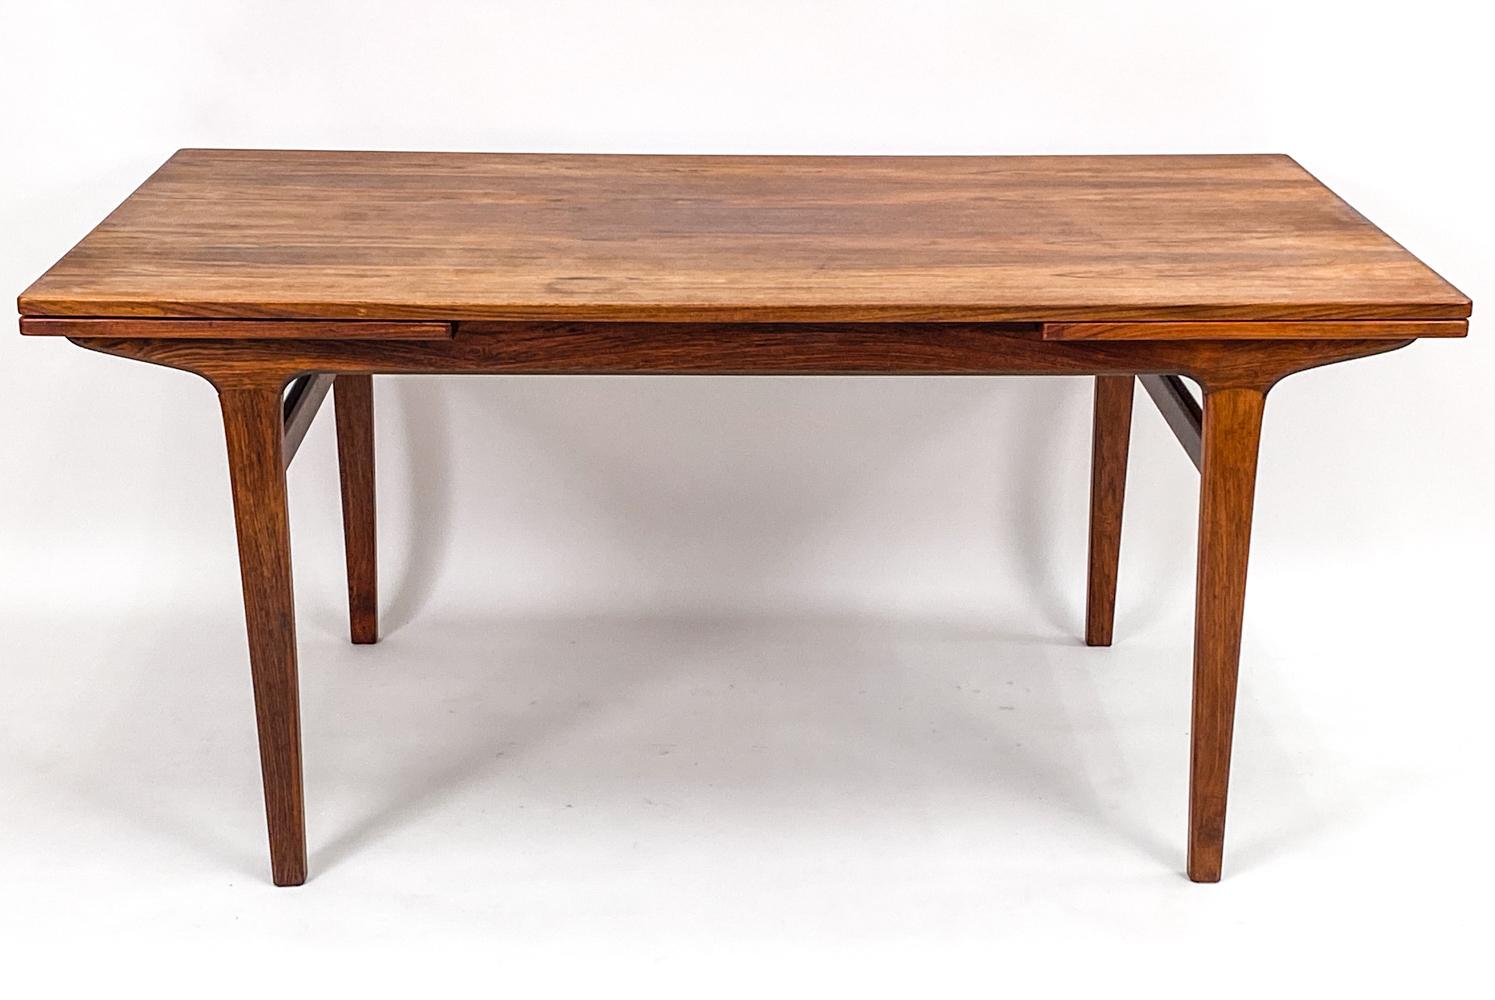 A gorgeous Danish mid-century dining table in stunning rosewood designed by Johannes Andersen. The minimalist design of this rectangular table lets the beautiful rosewood color and grain shine without distraction. Two hidden pull-out extension